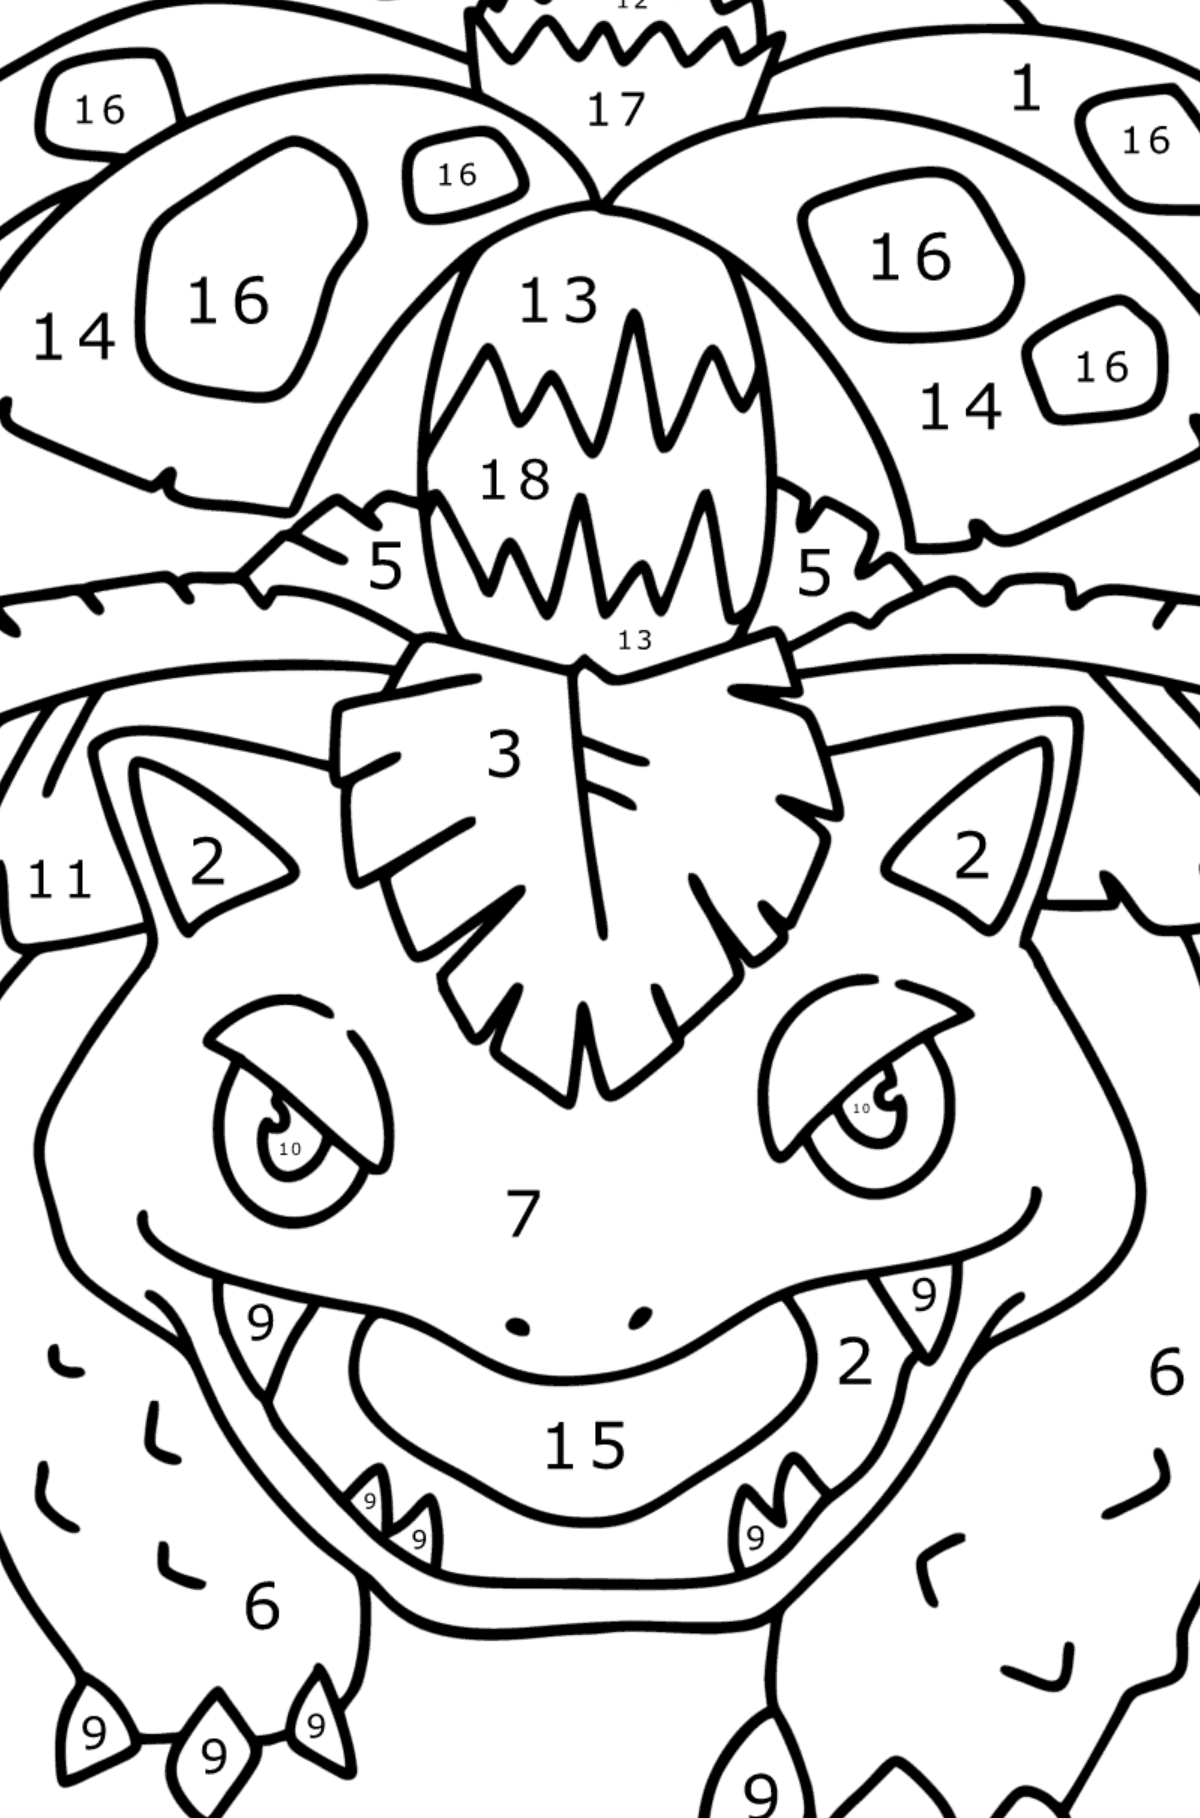 Coloring page Pokémon Go Venusaur - Coloring by Numbers for Kids